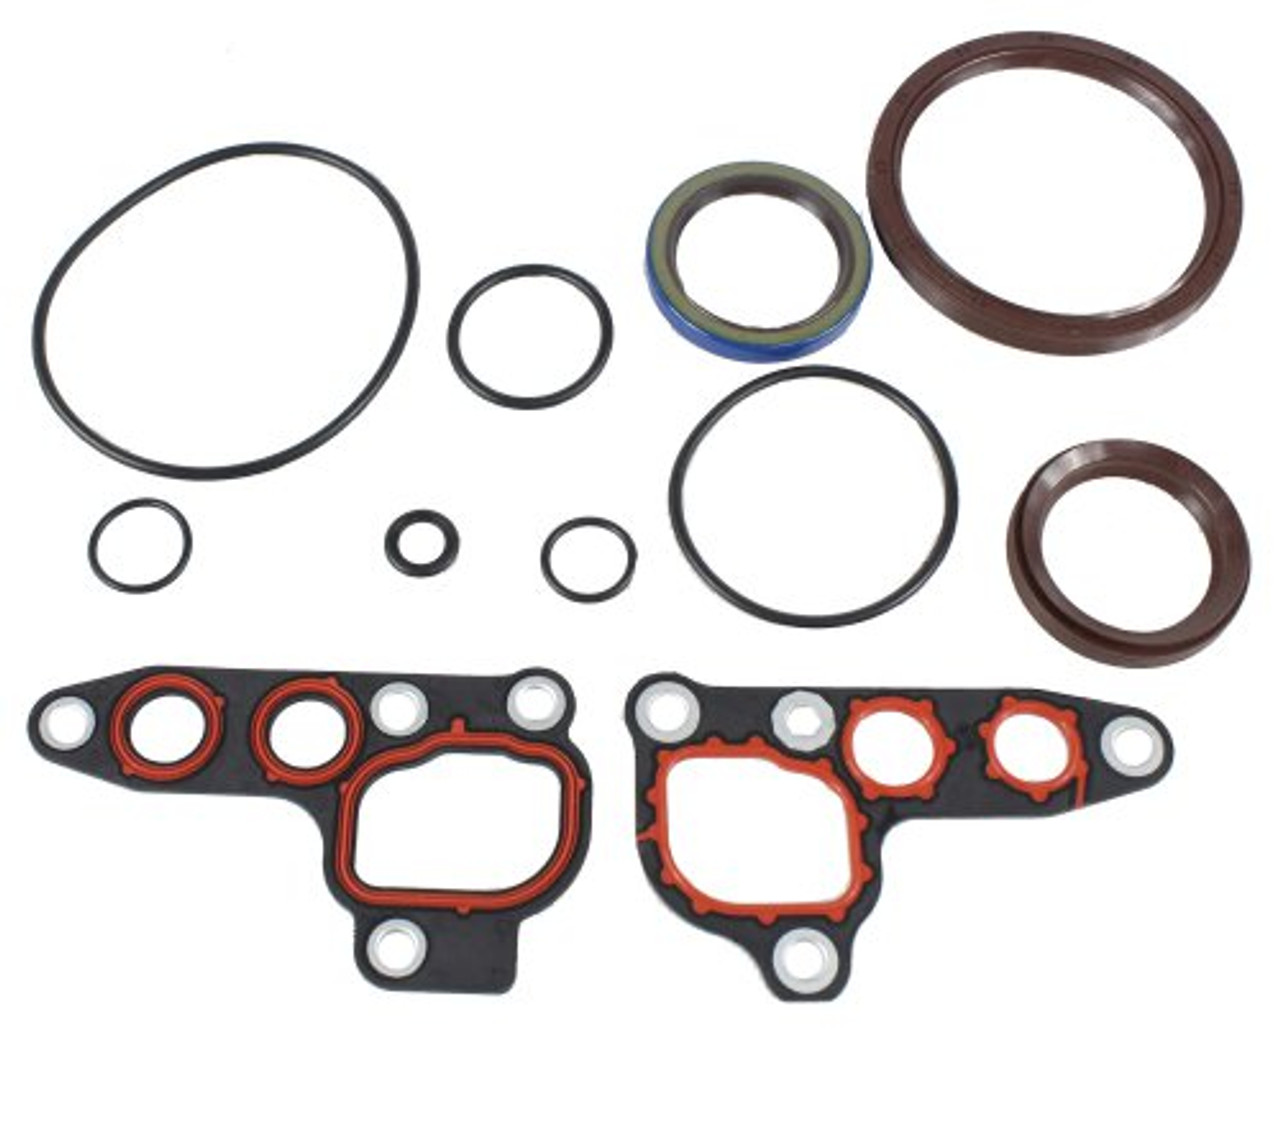 Lower Gasket Set - 2003 Ford Expedition 5.4L Engine Parts # LGS4150ZE162